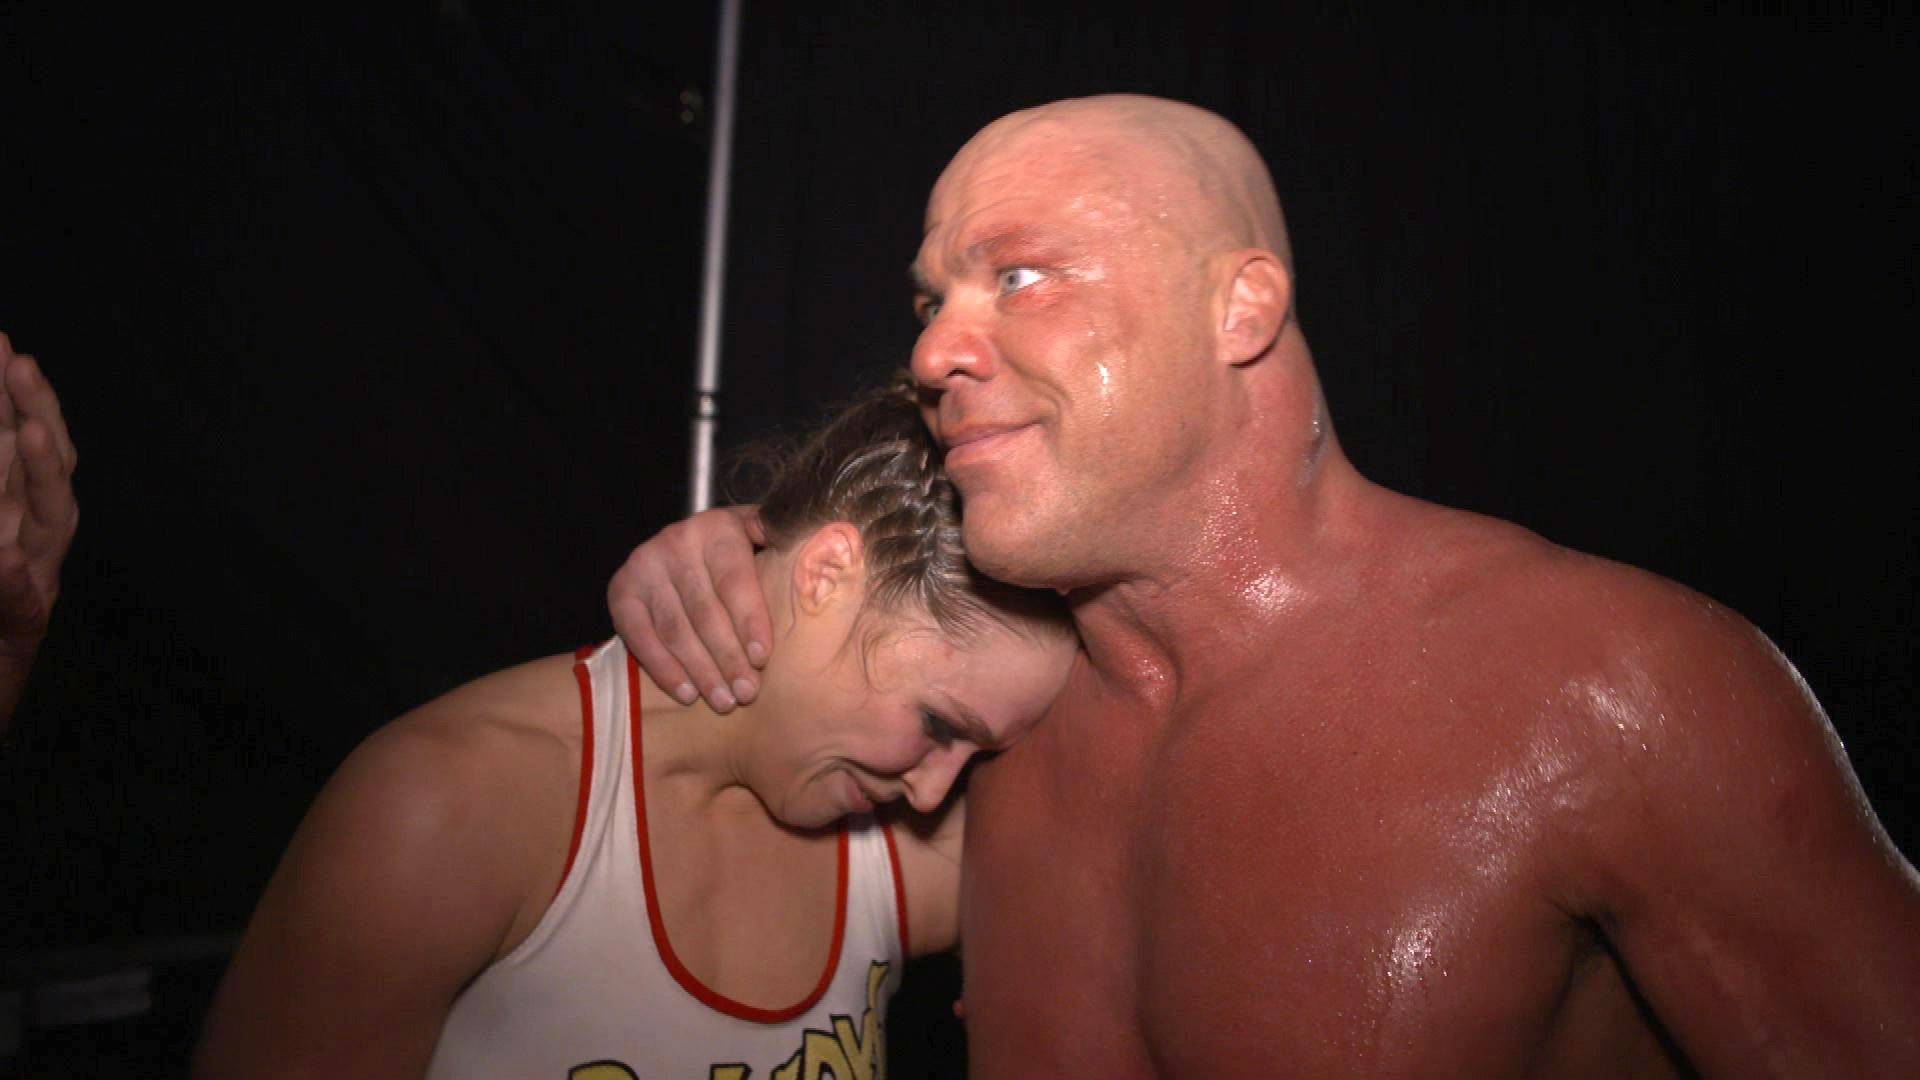 Ronda Rousey celebrates her WrestleMania debut with Kurt Angle: WWE.com Exclusive, April 8, 2018